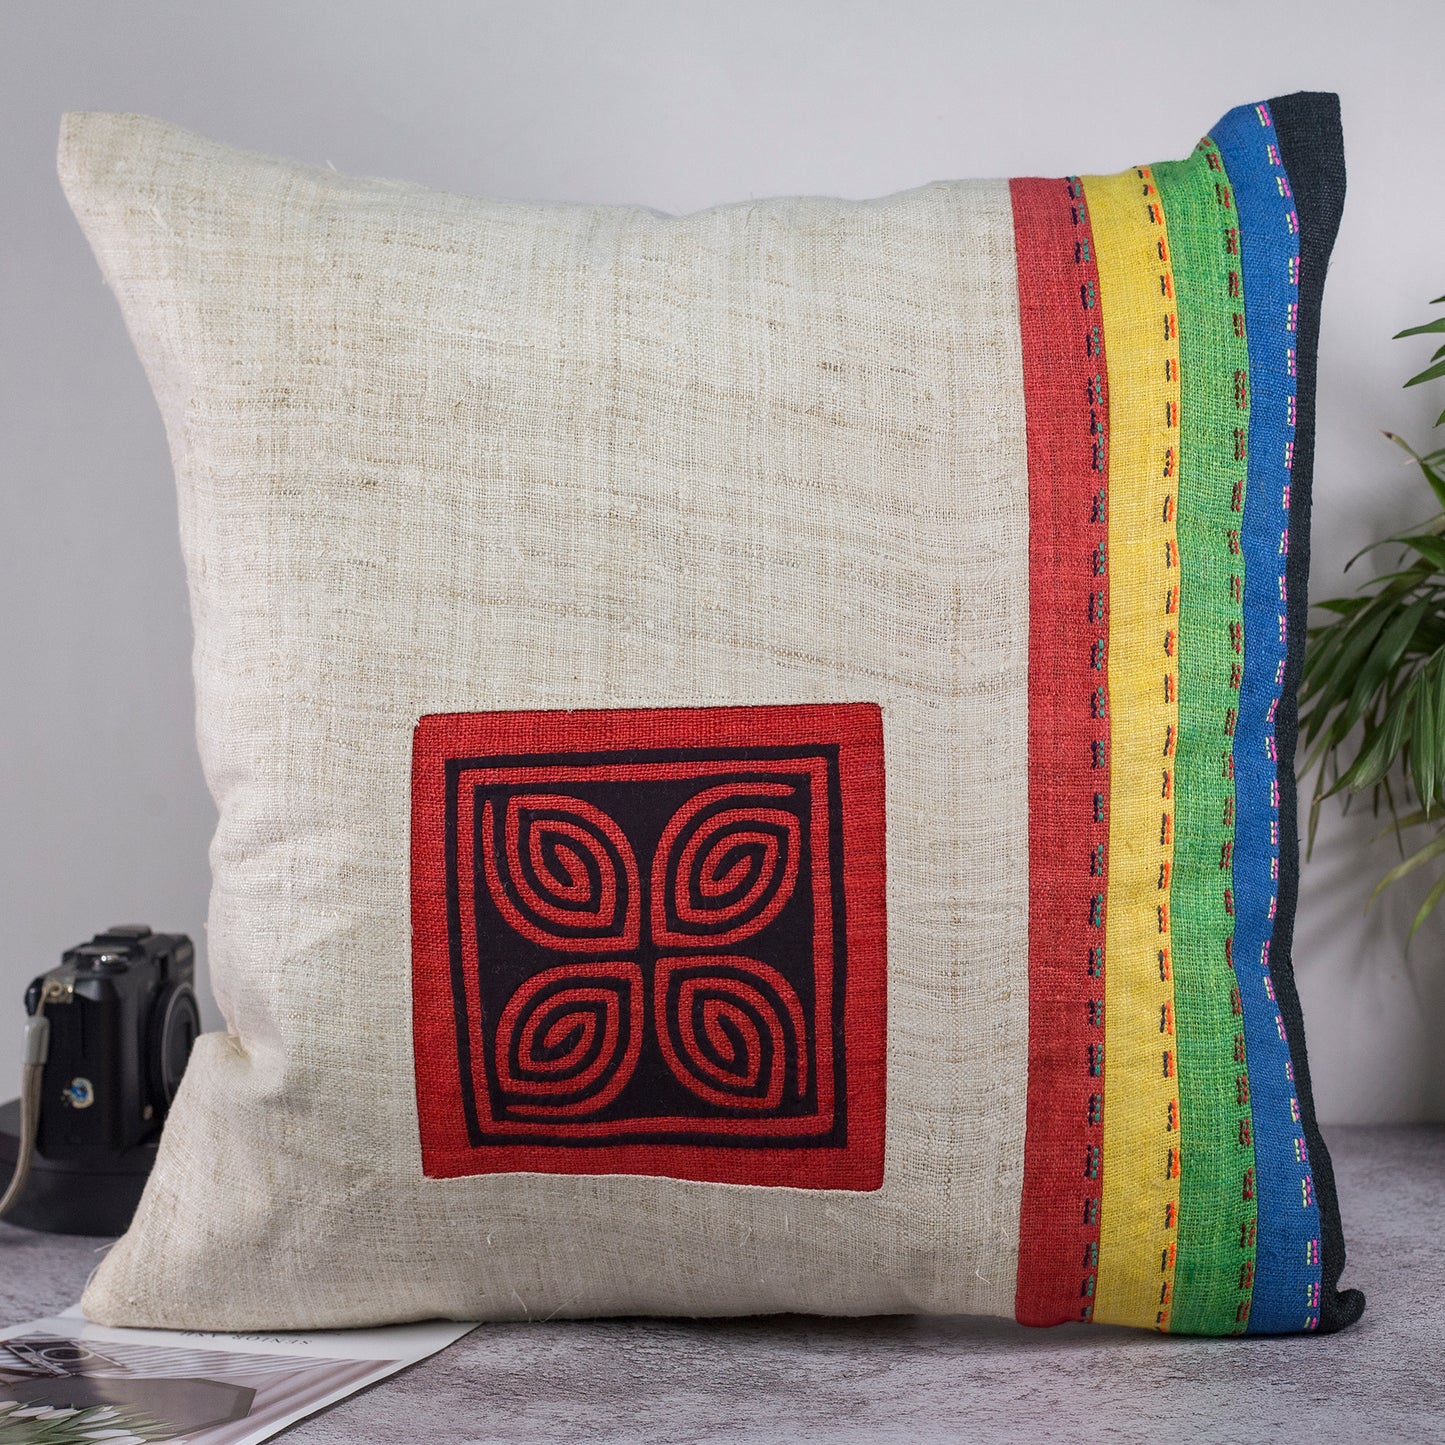 Beige Hemp Cushion Cover with stripes in different colors, hand-stitched pattern in black and red